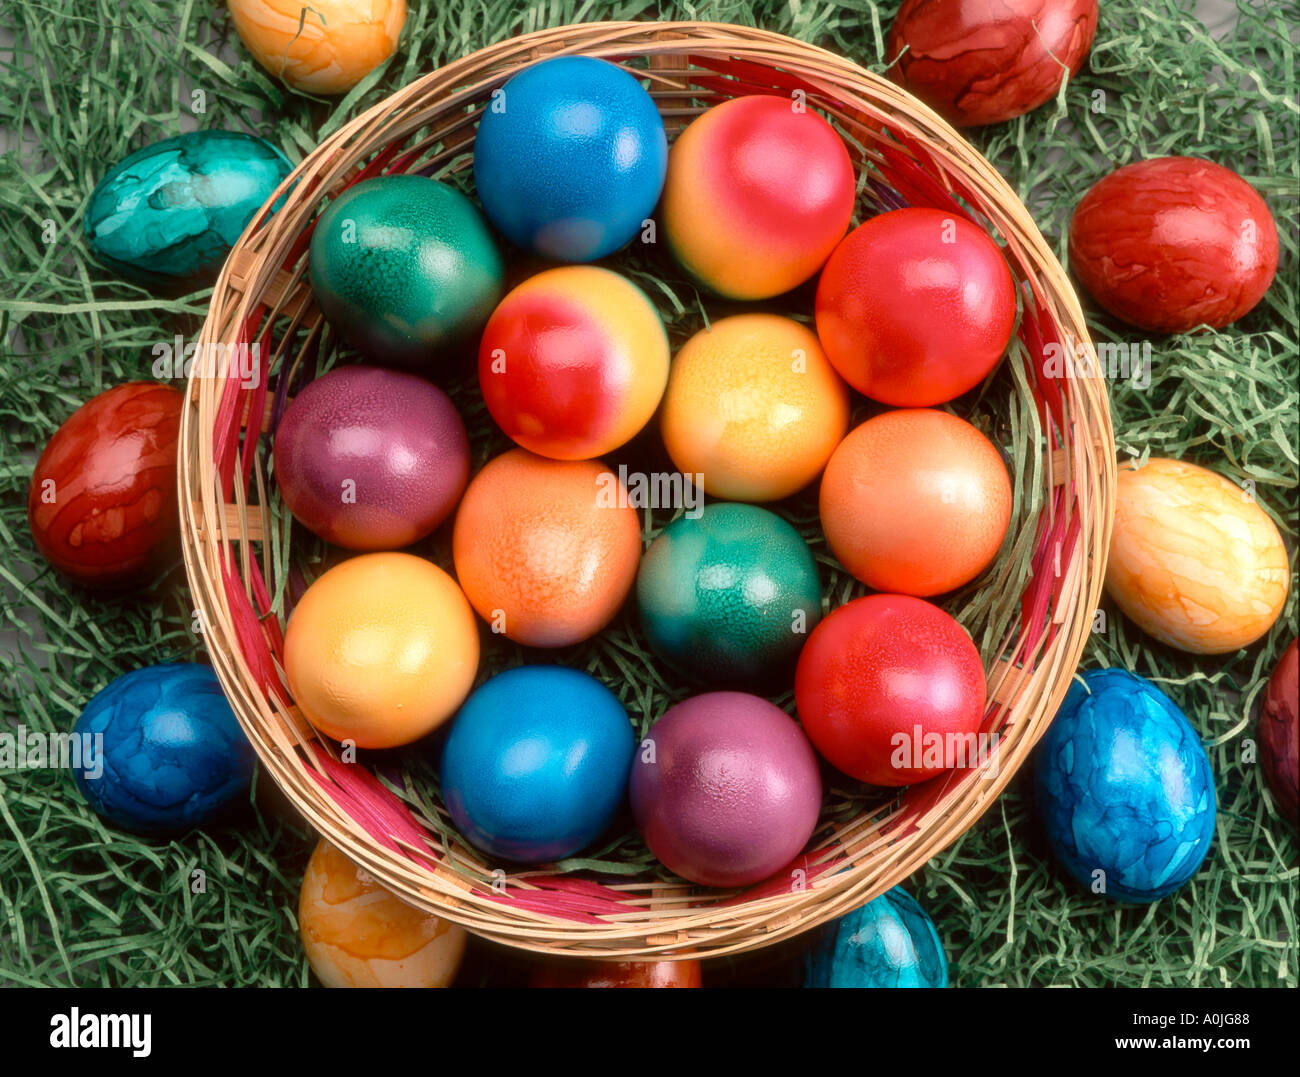 children playing outdoor in garden with painted Easter eggs in a basket Stock Photo